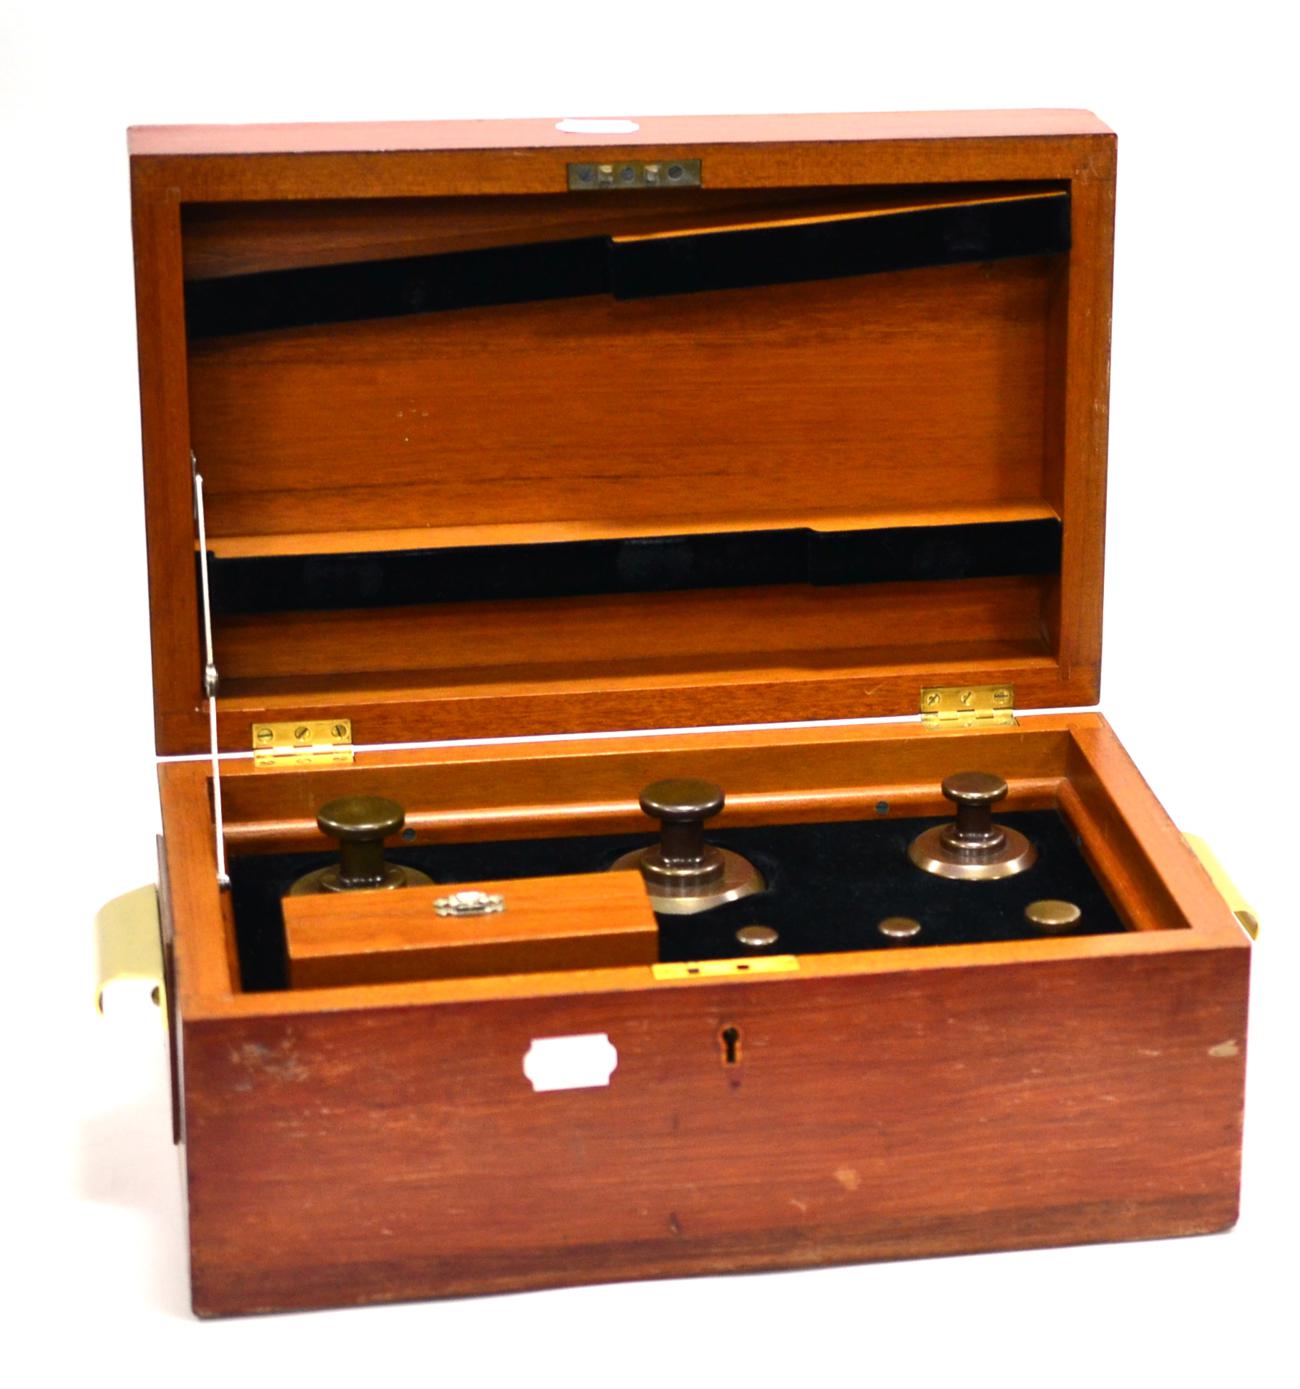 Oertling Weights Set For Lagos City Council 2kg to 1mg in stained wood box